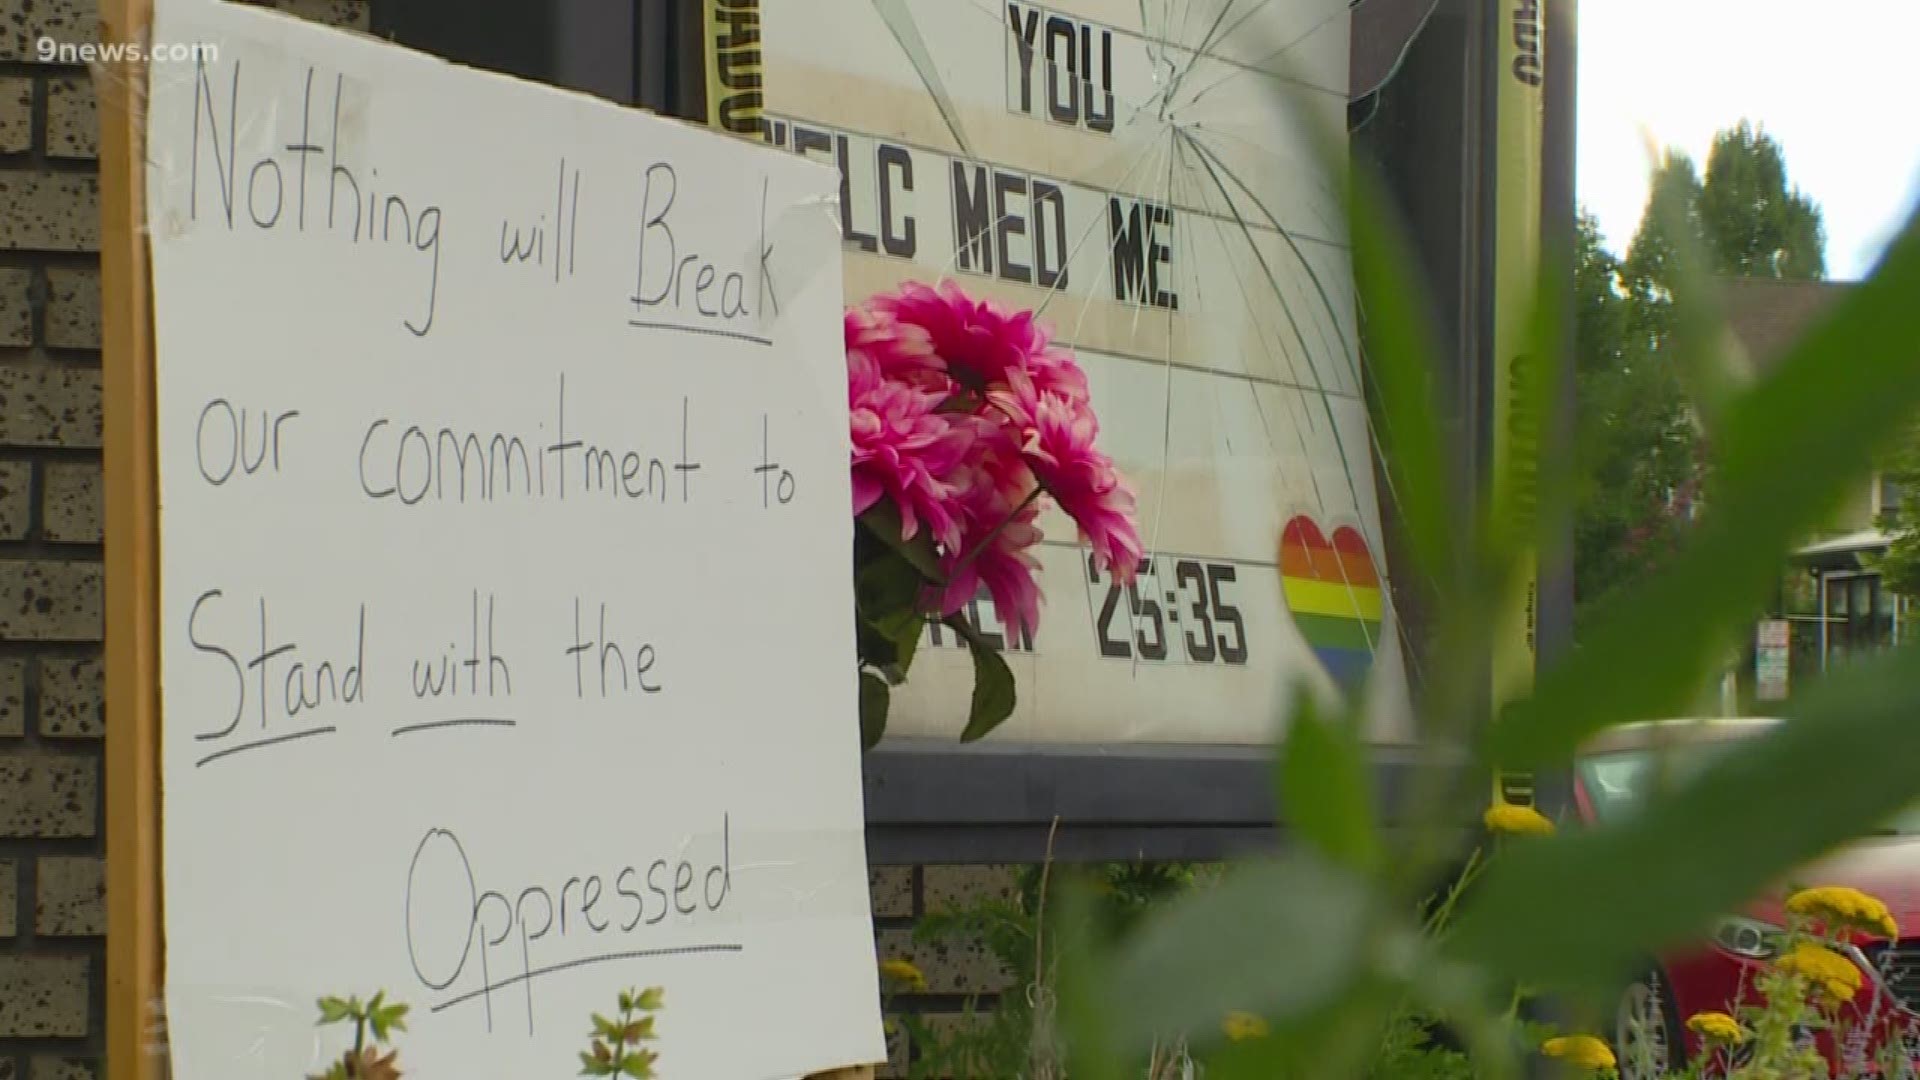 The pastor didn't even think it was controversial -- until he saw what happened to the sign.